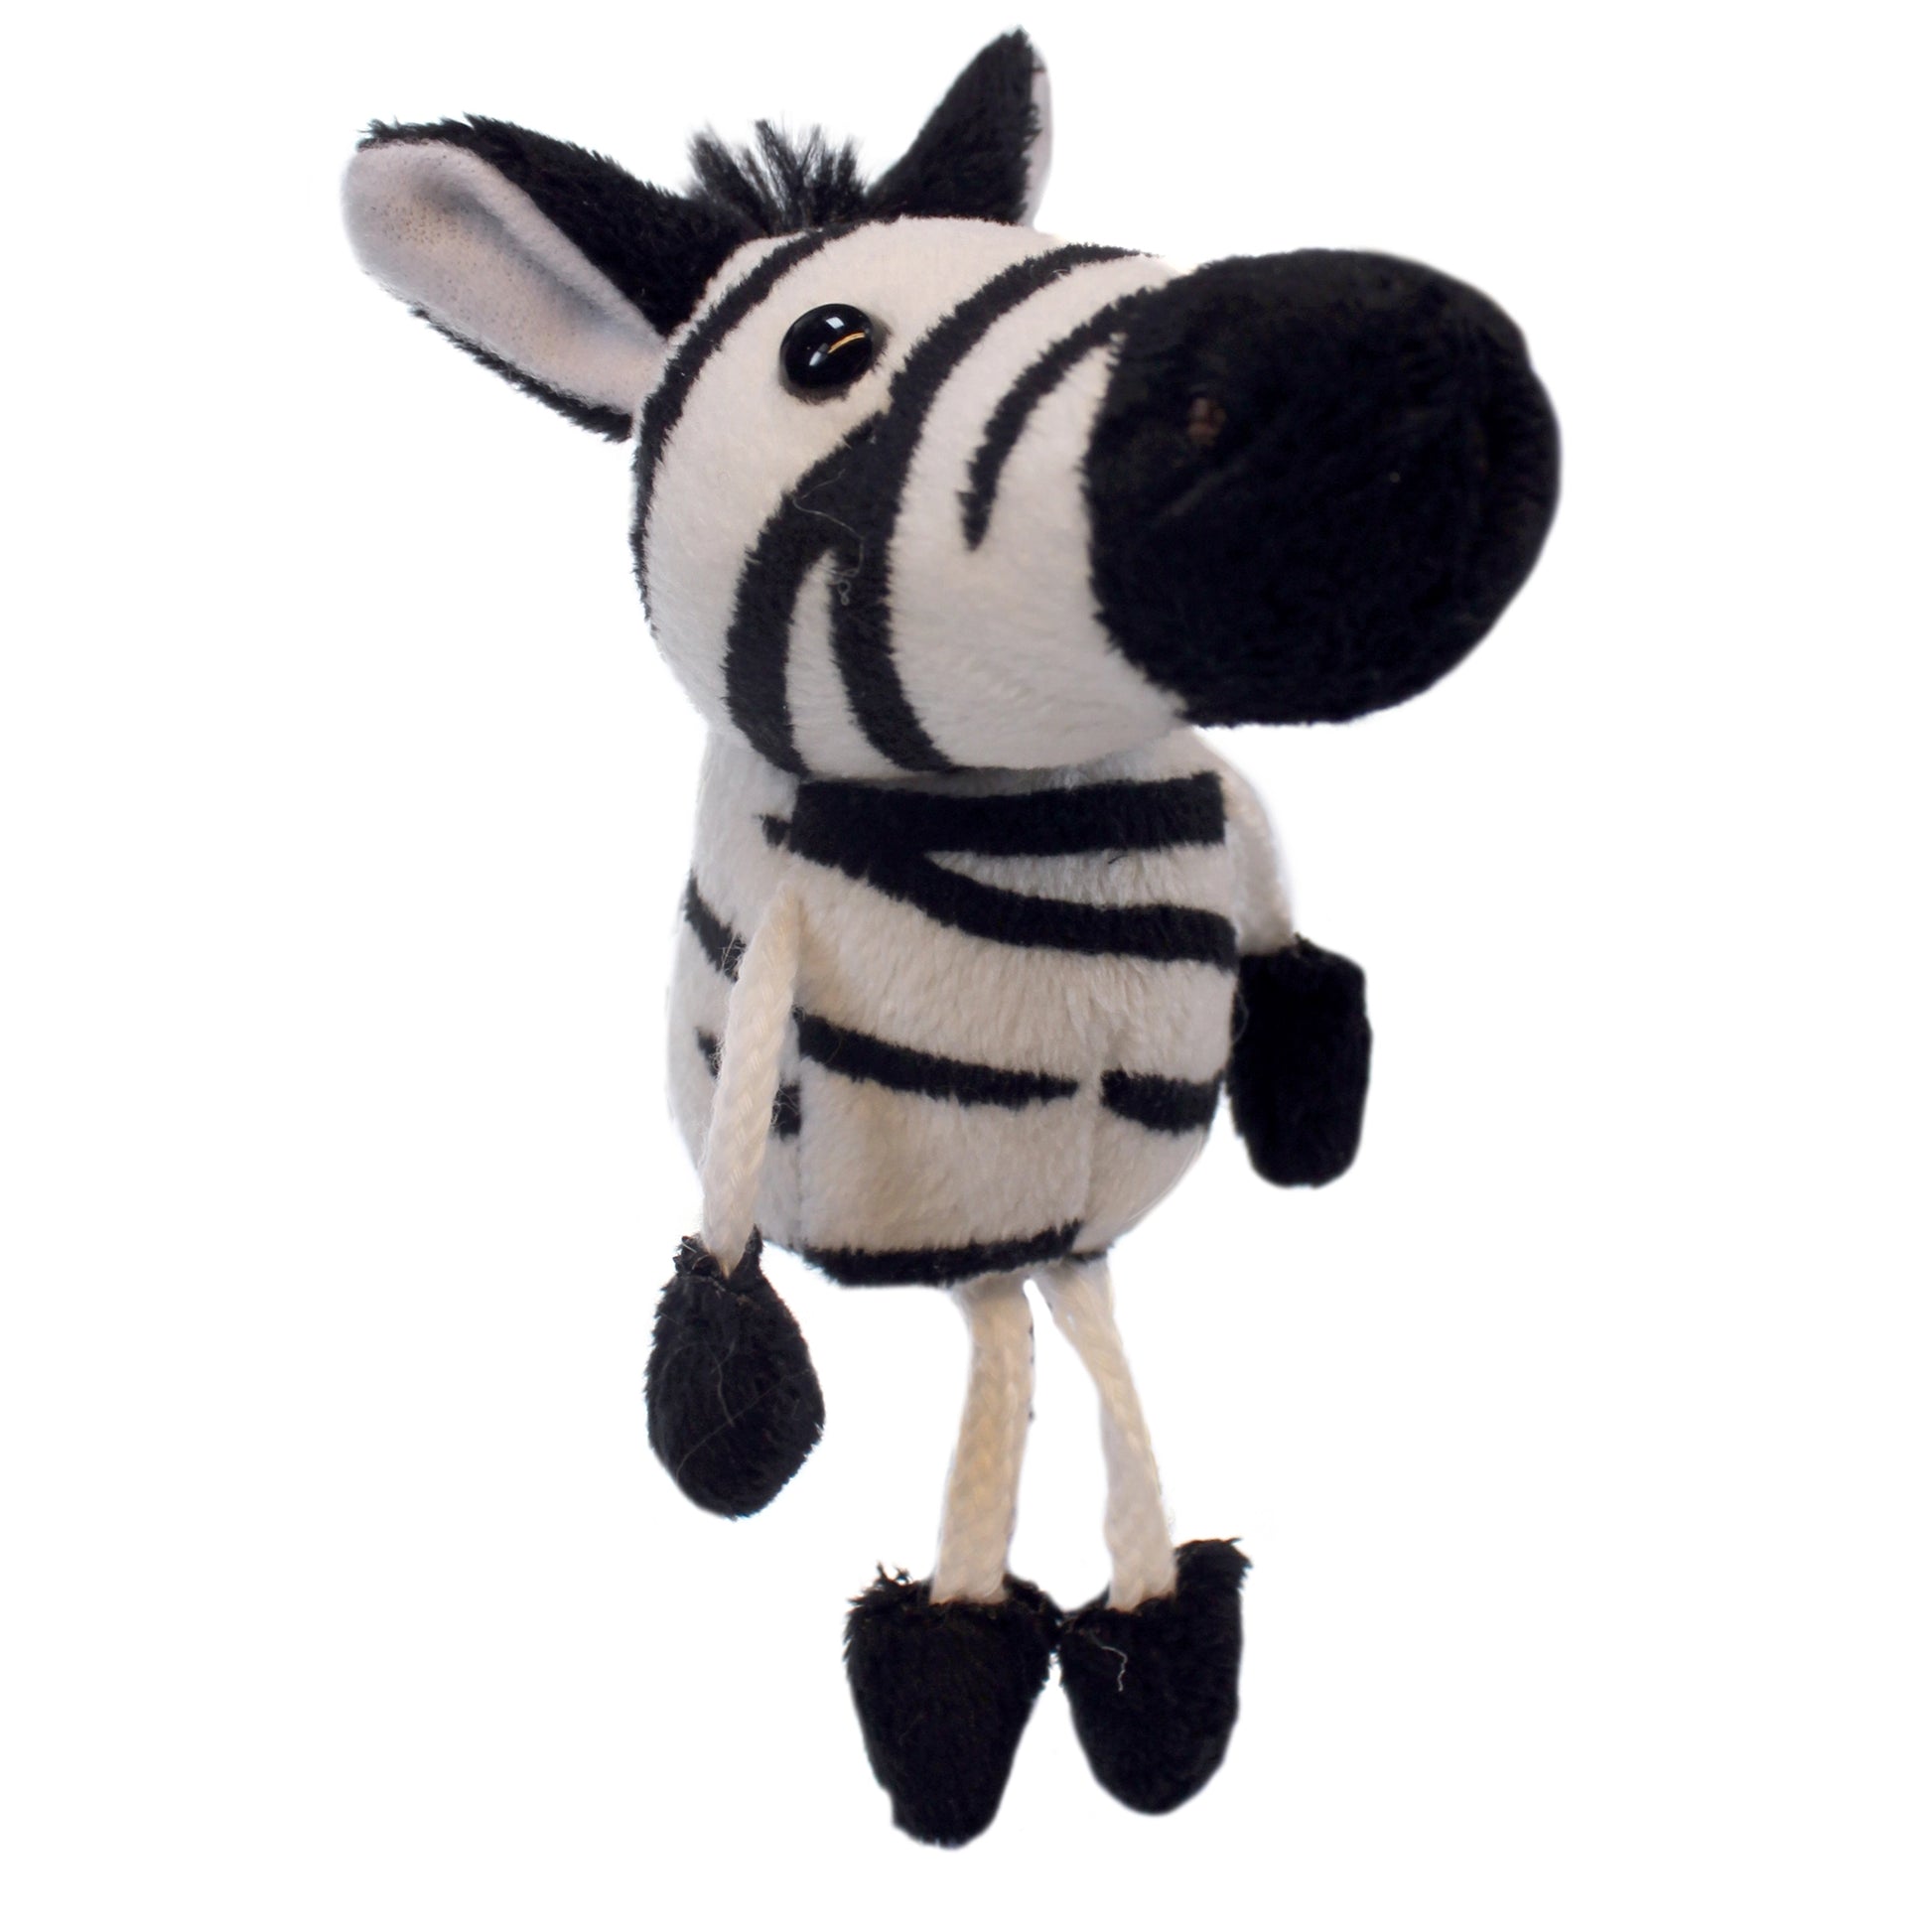 Zebra Finger Puppet - The Puppet Company - The Forgotten Toy Shop